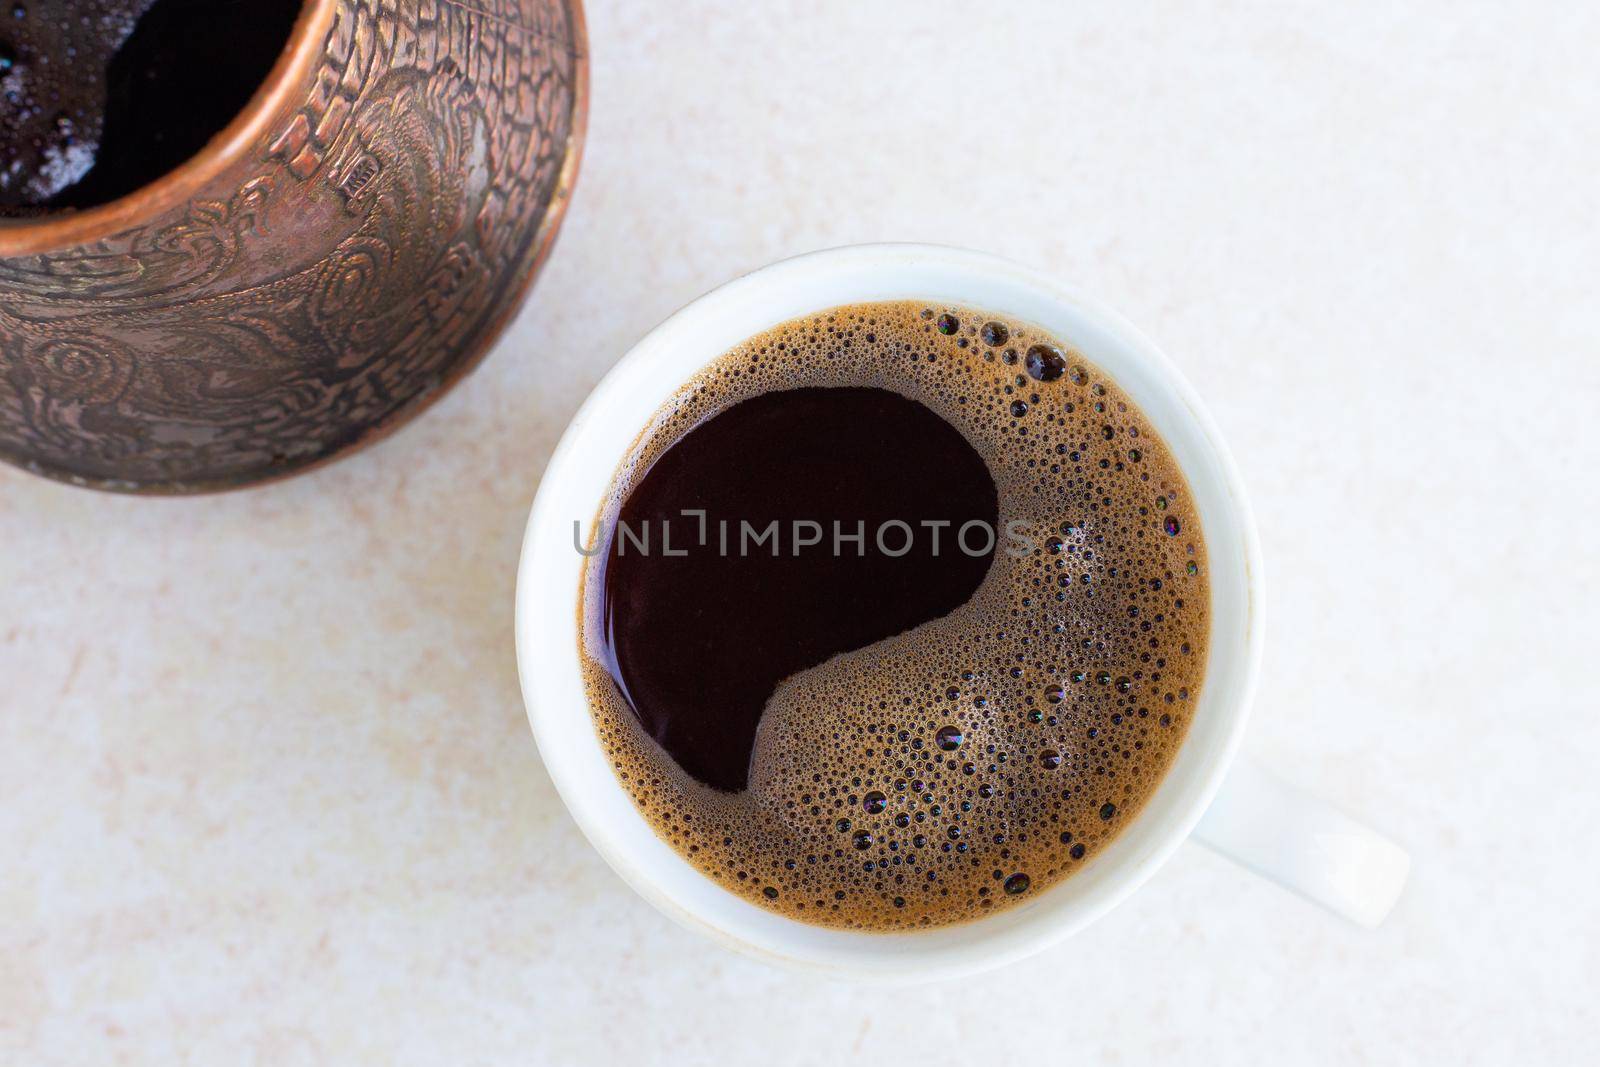 A mug and a Turk with freshly brewed coffee on a light table surface, top view. Morning awakening, the beginning of a new day. Strong invigorating drink.